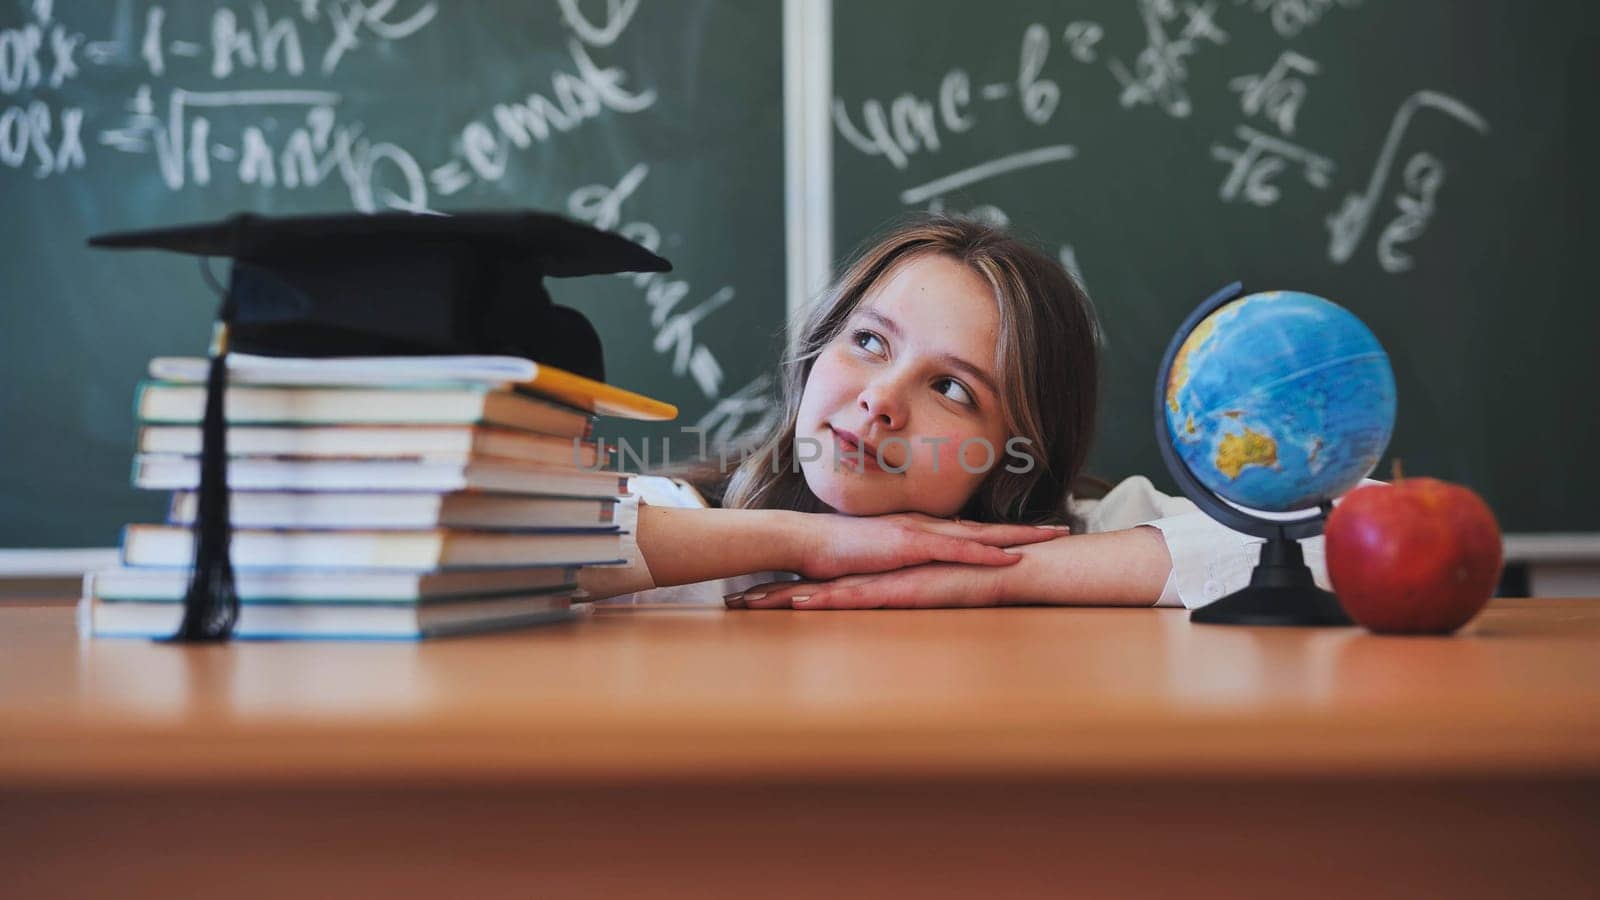 Adorable school girl posing at her desk against a background of blackboard, books, globe and graduation cap. by DovidPro